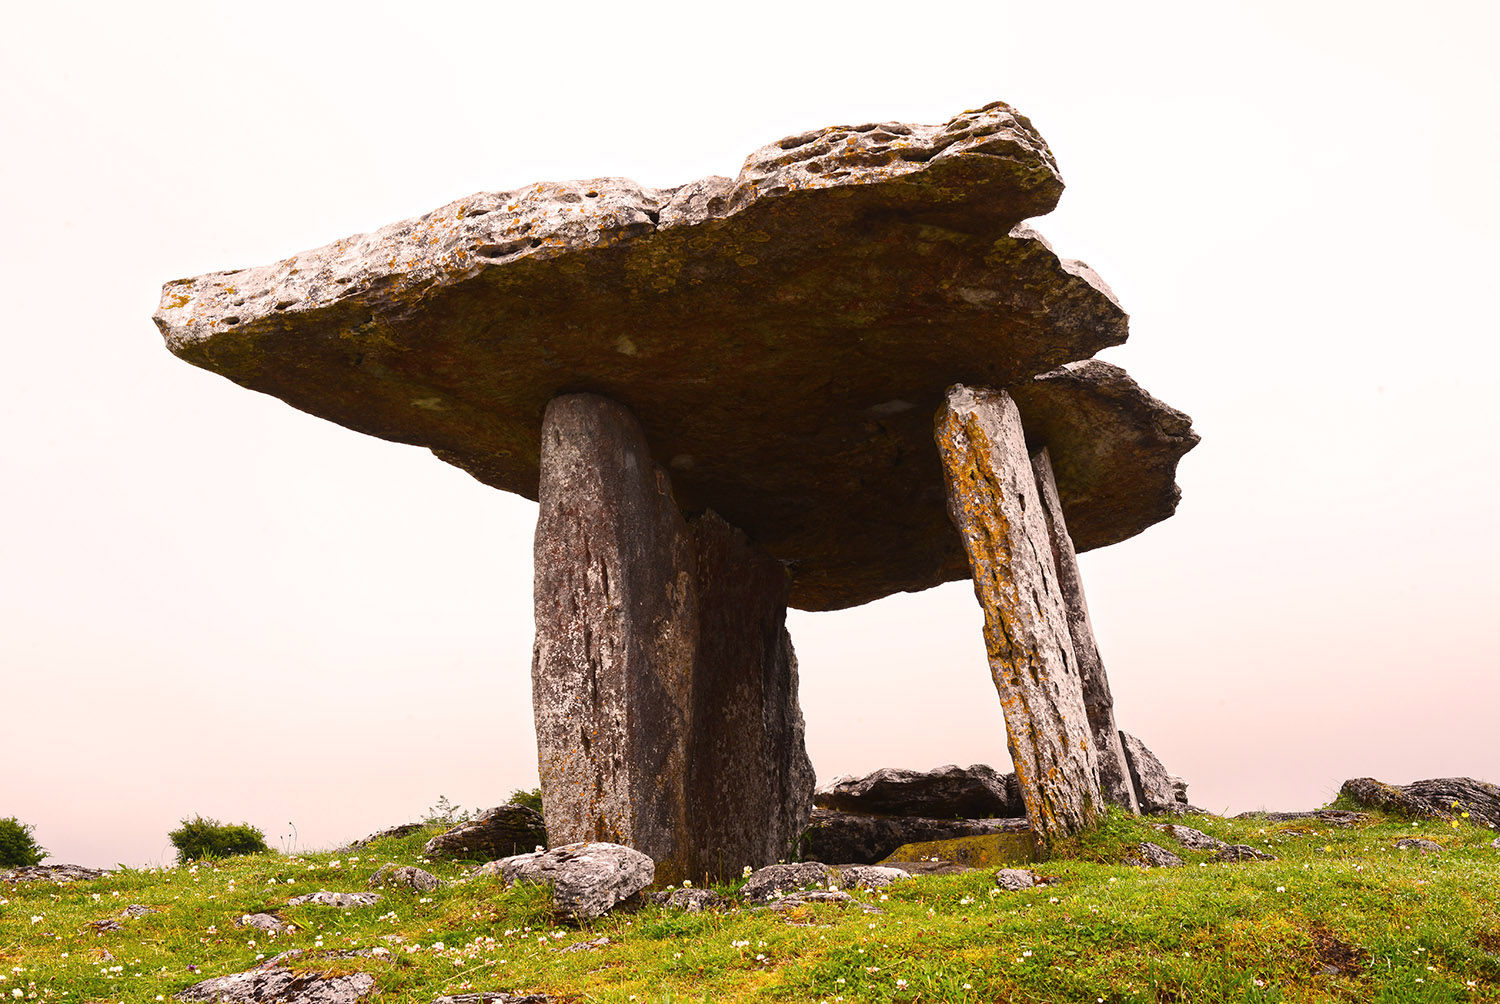 Megalith_Poulnabrone_Dolman_Stone_Structure_The_Burren_County Clare_Ireland.jpg